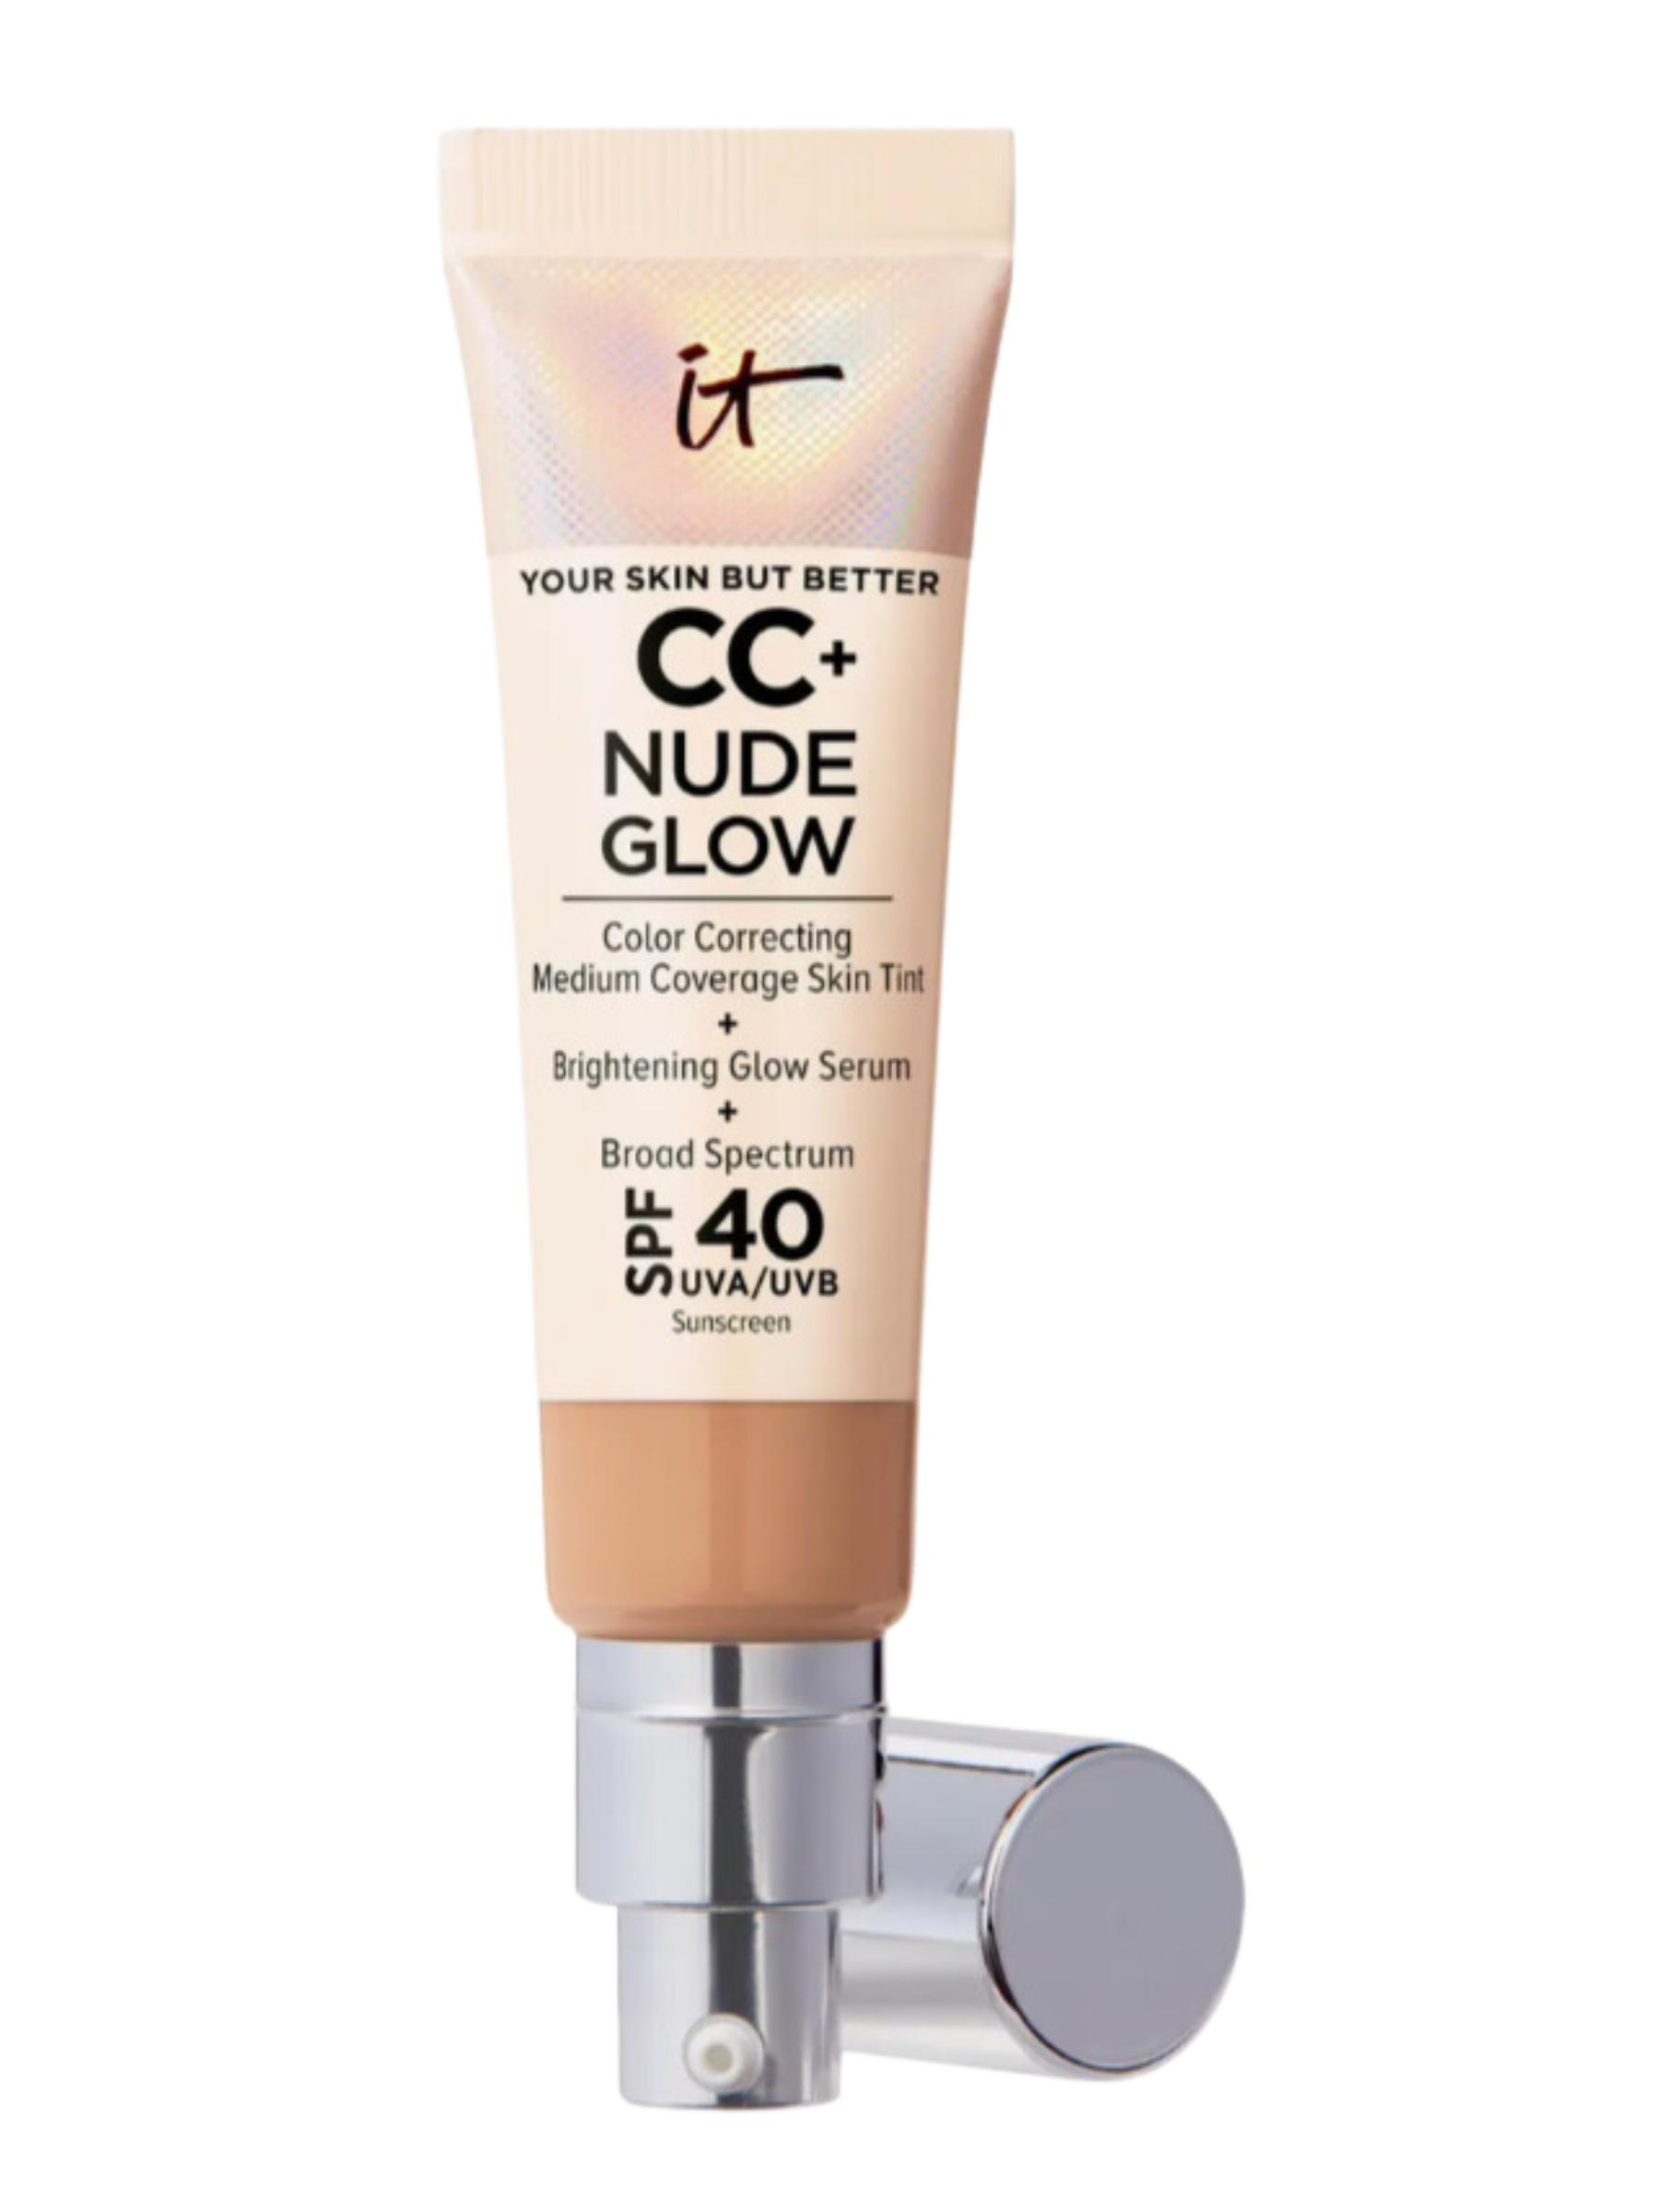 <p>Think of Nude Glow as the original CC+ Cream’s more luminous little sister. “Nude Glow takes it to a more radiant place, with a little less coverage,” says beauty expert <a href="https://www.alexisandroulakis.com/">Alexis Androulakis</a>, comparing the two. “It’s my personal preference that I go to more frequently—I just like it on the skin—and I’m definitely more of a radiance gal.” It delivers true medium buildable coverage in a formula that’s part skin tint, part glow serum, for an enhanced luminous finish. But don’t mistake luminous for sparkly; instead, the CC+ Cream leaves behind a lit-from-within glow for the perfect no-makeup makeup base.</p> <p><strong>Size:</strong> 1.08 ounces / <strong>Shades:</strong> 22 / <strong>Key Ingredients:</strong> Niacinamide, hyaluronic acid, green tea extract / <strong>Finish:</strong> Luminous / <strong>SPF:</strong> 40</p> <ul> <li>Pros: Buildable coverage, glowy finish</li> <li>Cons: Not ideal for oily skin types</li> </ul> $47, Nordstrom. <a href="https://www.nordstrom.com/s/it-cosmetics-cc-nude-glow-lightweight-foundation-glow-serum-spf-40/6812581">Get it now!</a><p>Sign up for today’s biggest stories, from pop culture to politics.</p><a href="https://www.glamour.com/newsletter/news?sourceCode=msnsend">Sign Up</a>